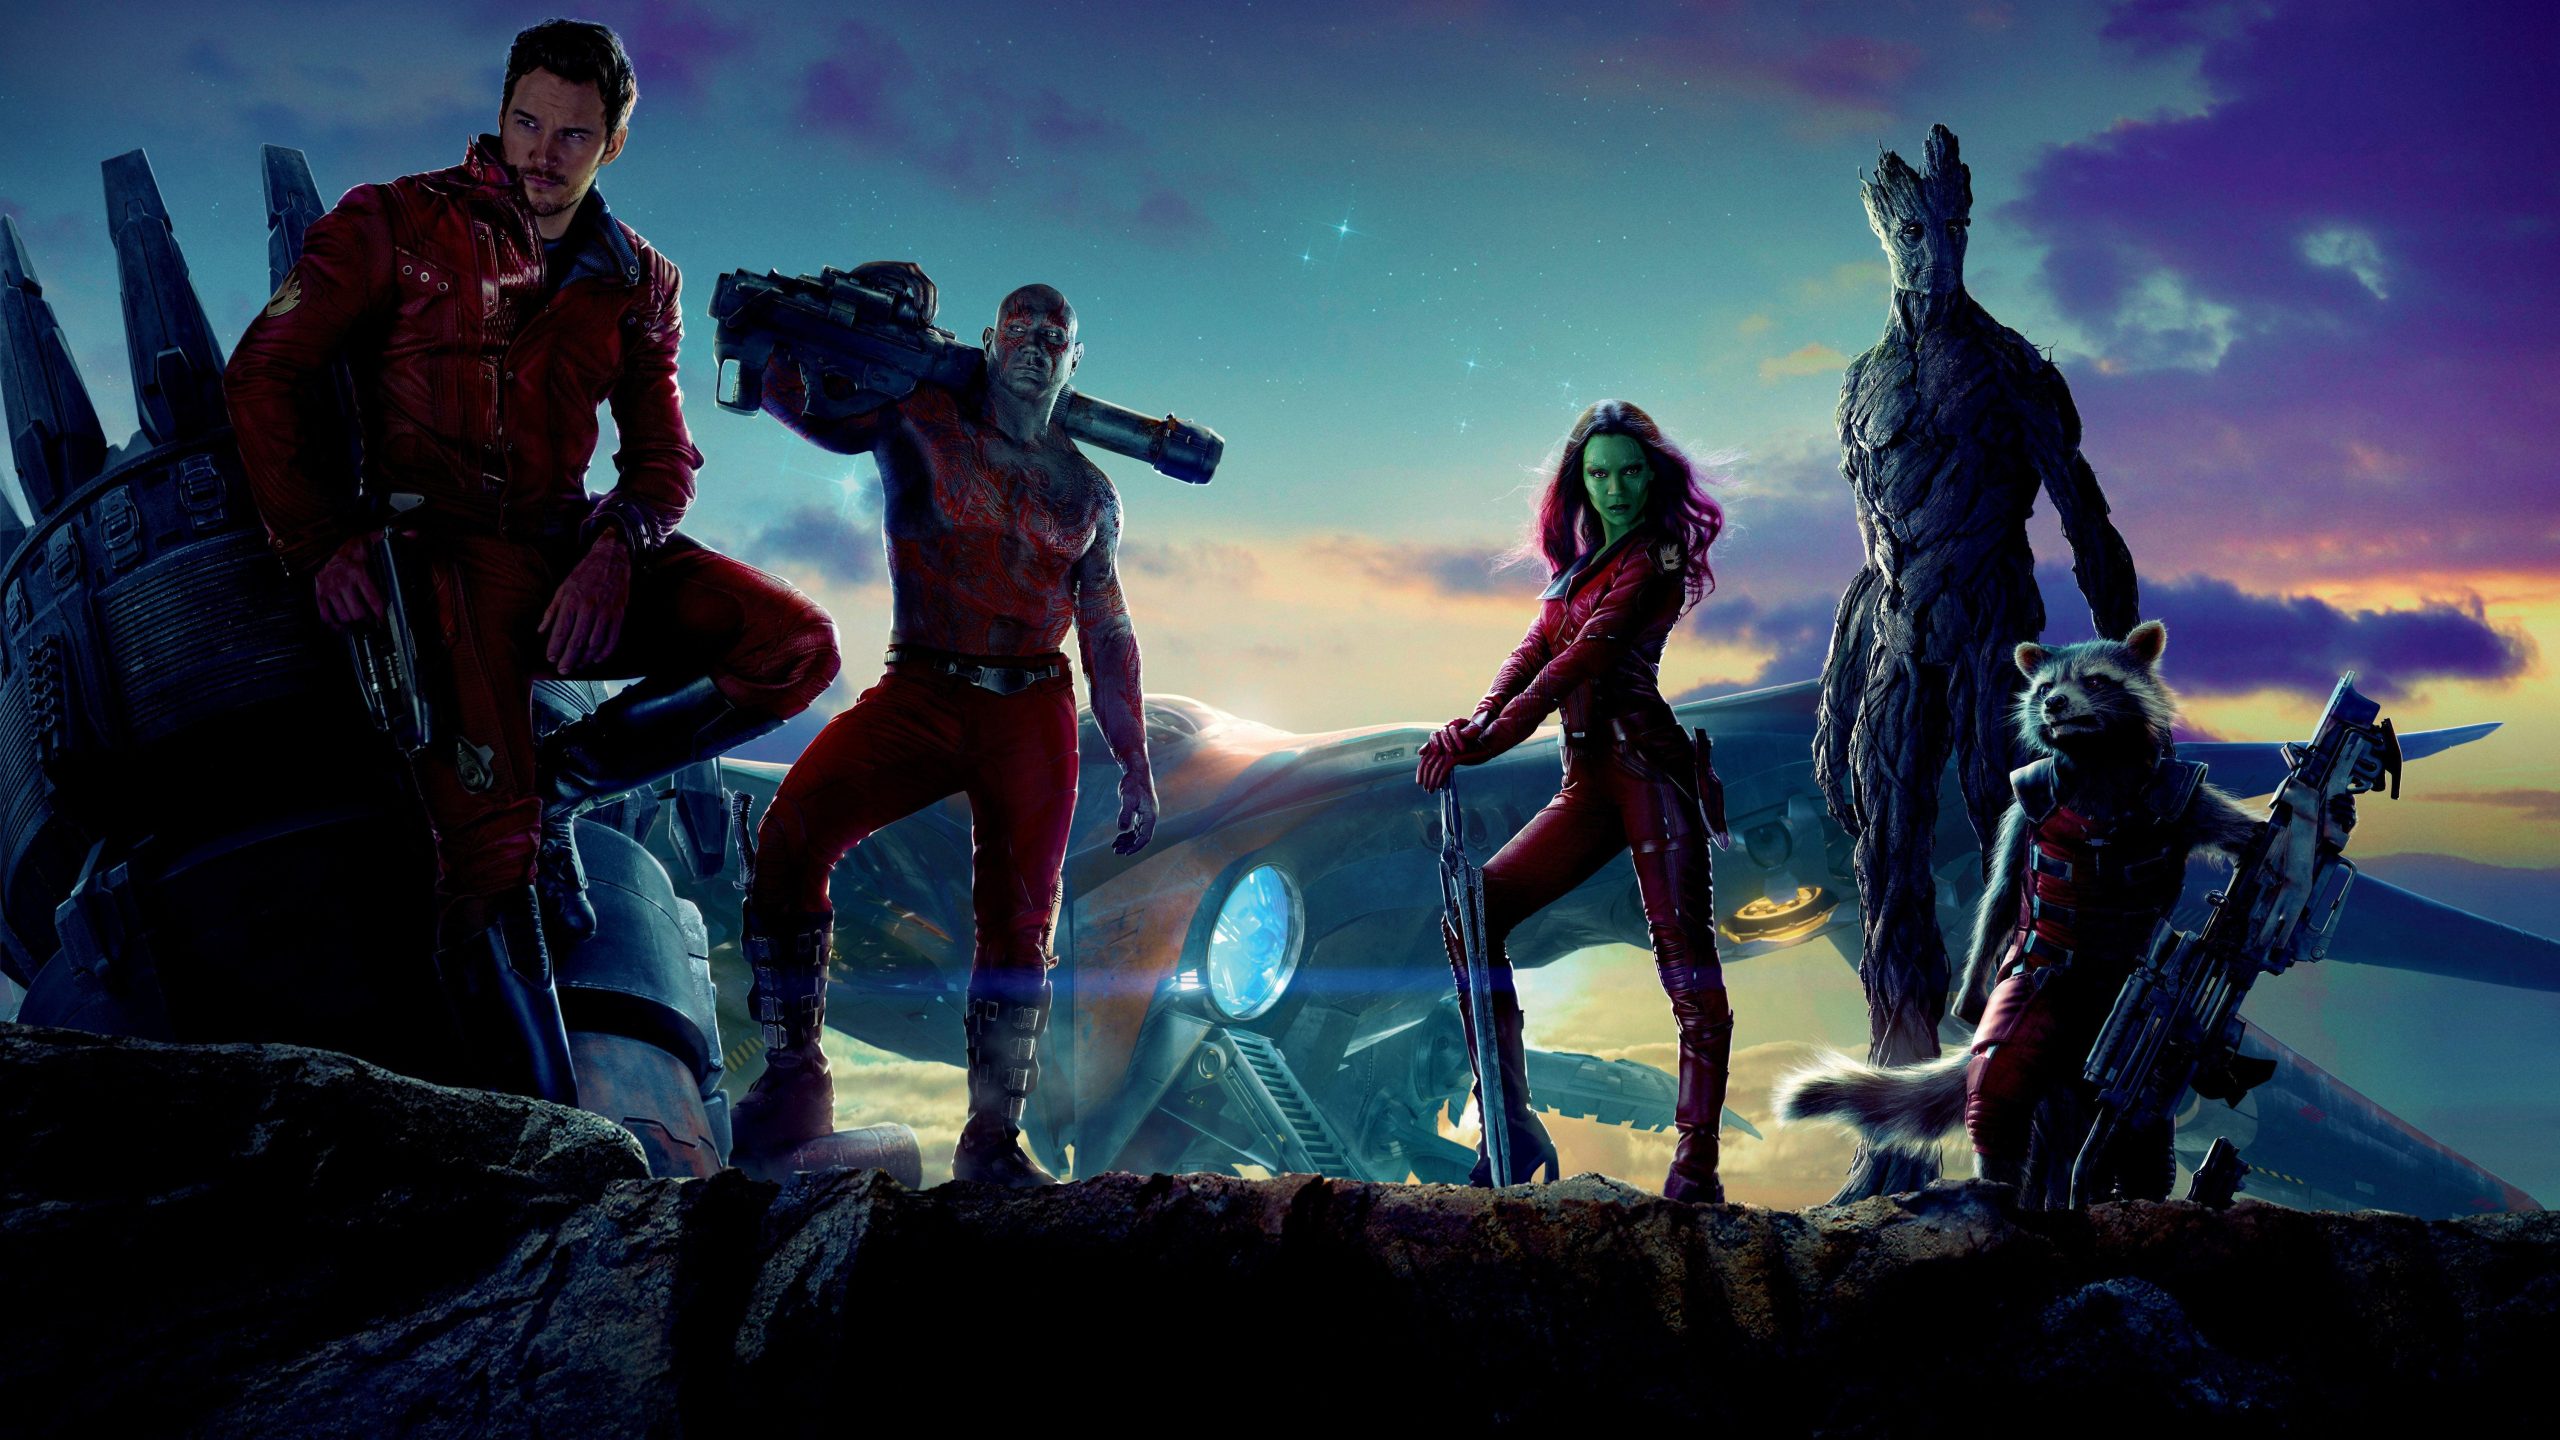 Guardians Of The Galaxy Star-Lord Desktop Wallpaper Hd, Guardians Of The Galaxy Star-Lord, Movies